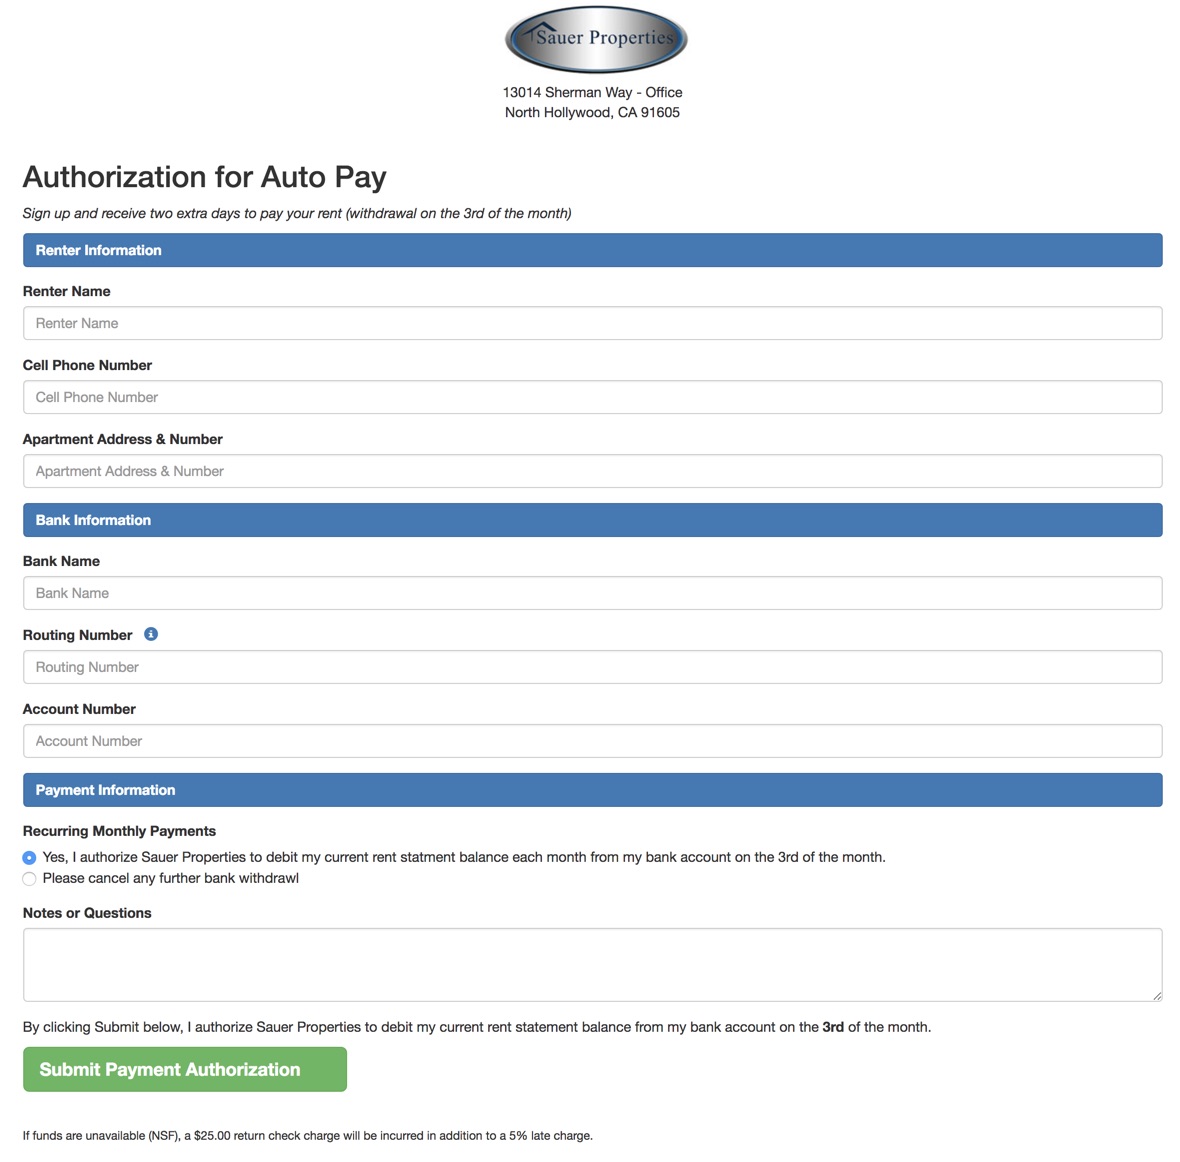 Sauer Properties FileMaker Residential Rental Property Mangement -- Authorization Page